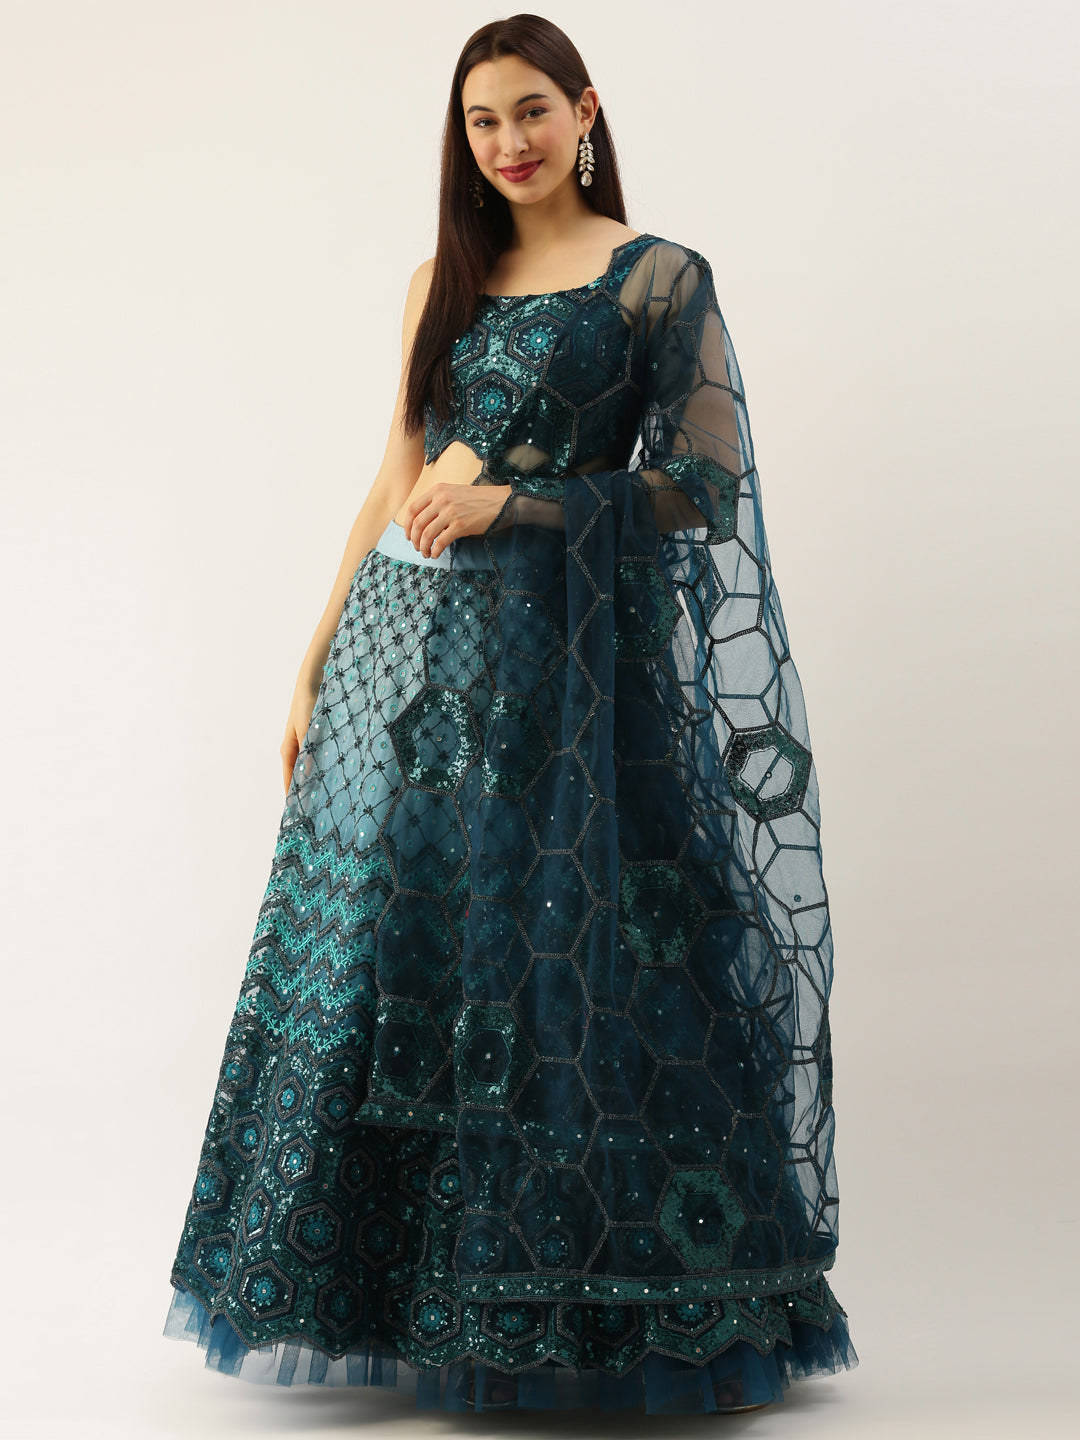 Women's Teal Net Embroidered Sequince Lehenga & Blouse With Dupatta - Royal Dwells